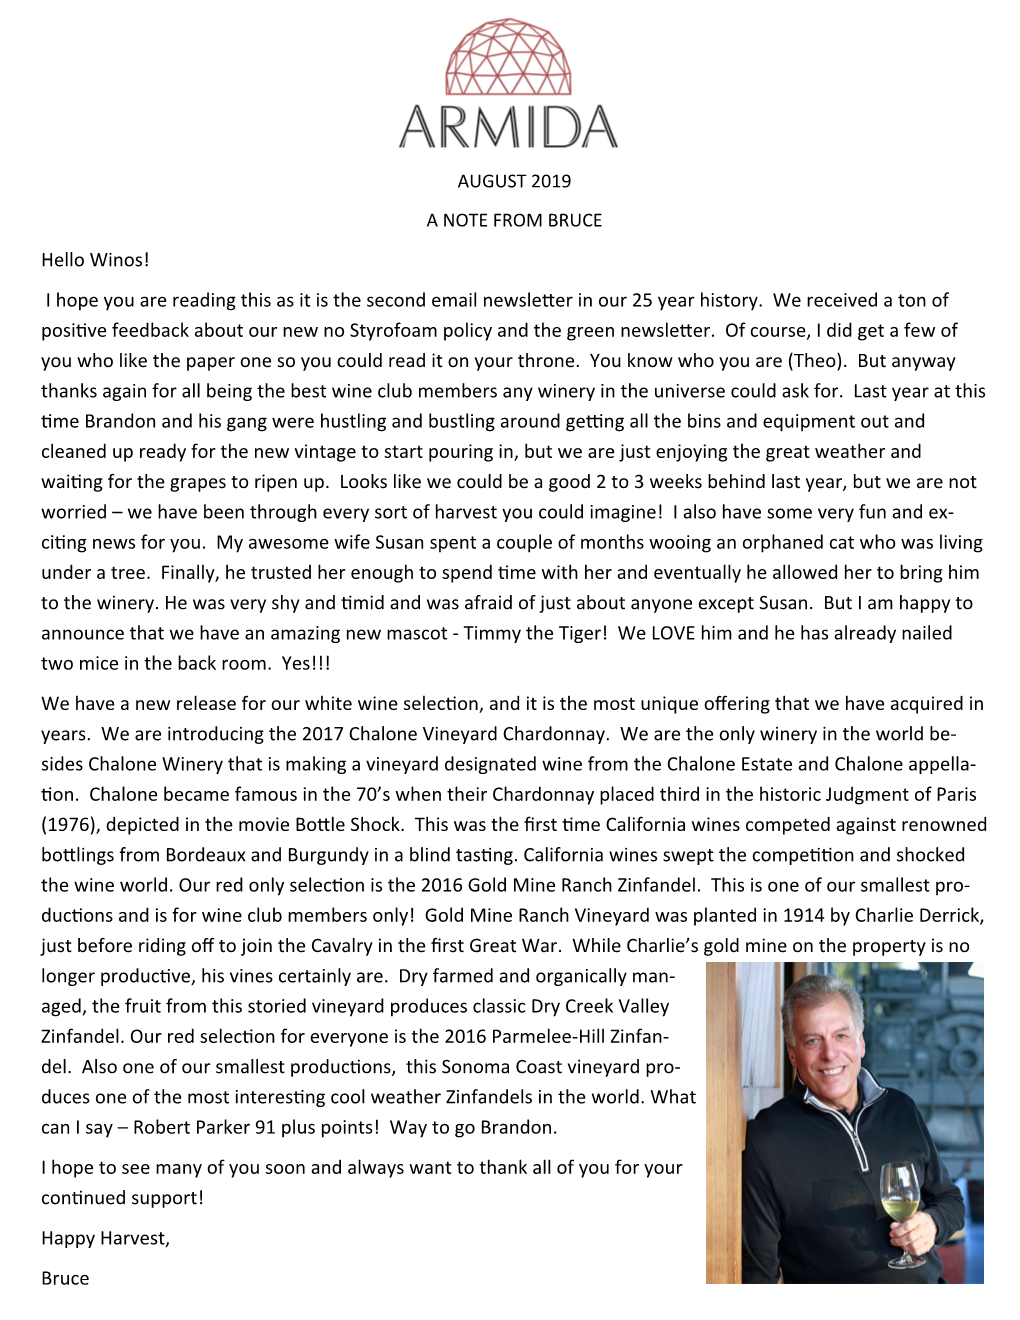 AUGUST 2019 a NOTE from BRUCE Hello Winos! I Hope You Are Reading This As It Is the Second Email Newsle�Er in Our 25 Year History